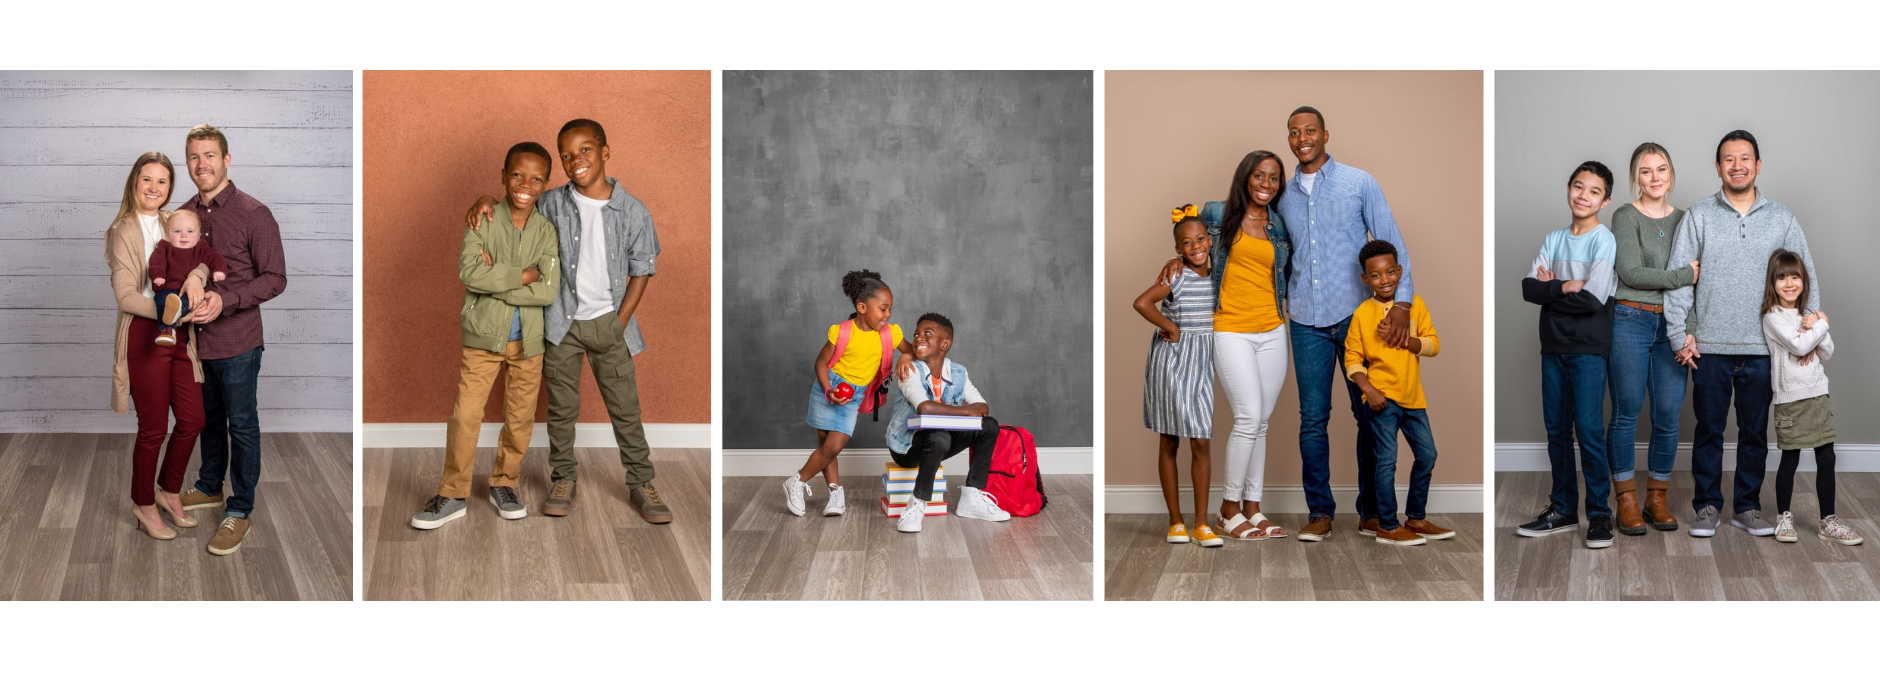 Ideas for fall pictures captured on our fall photo backgrounds.